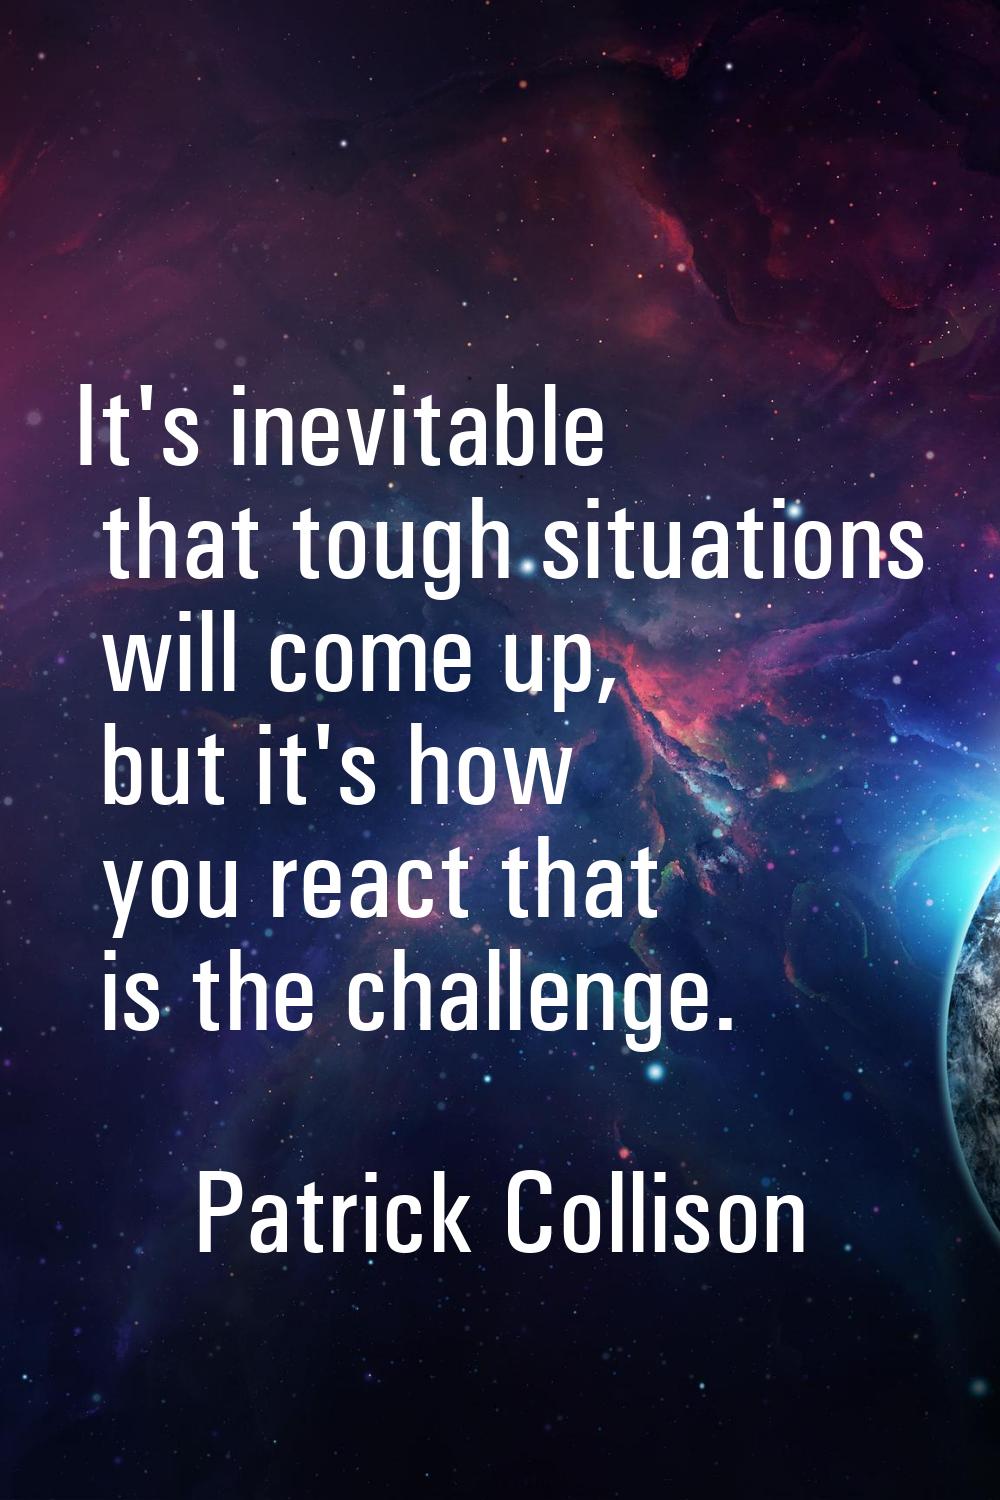 It's inevitable that tough situations will come up, but it's how you react that is the challenge.